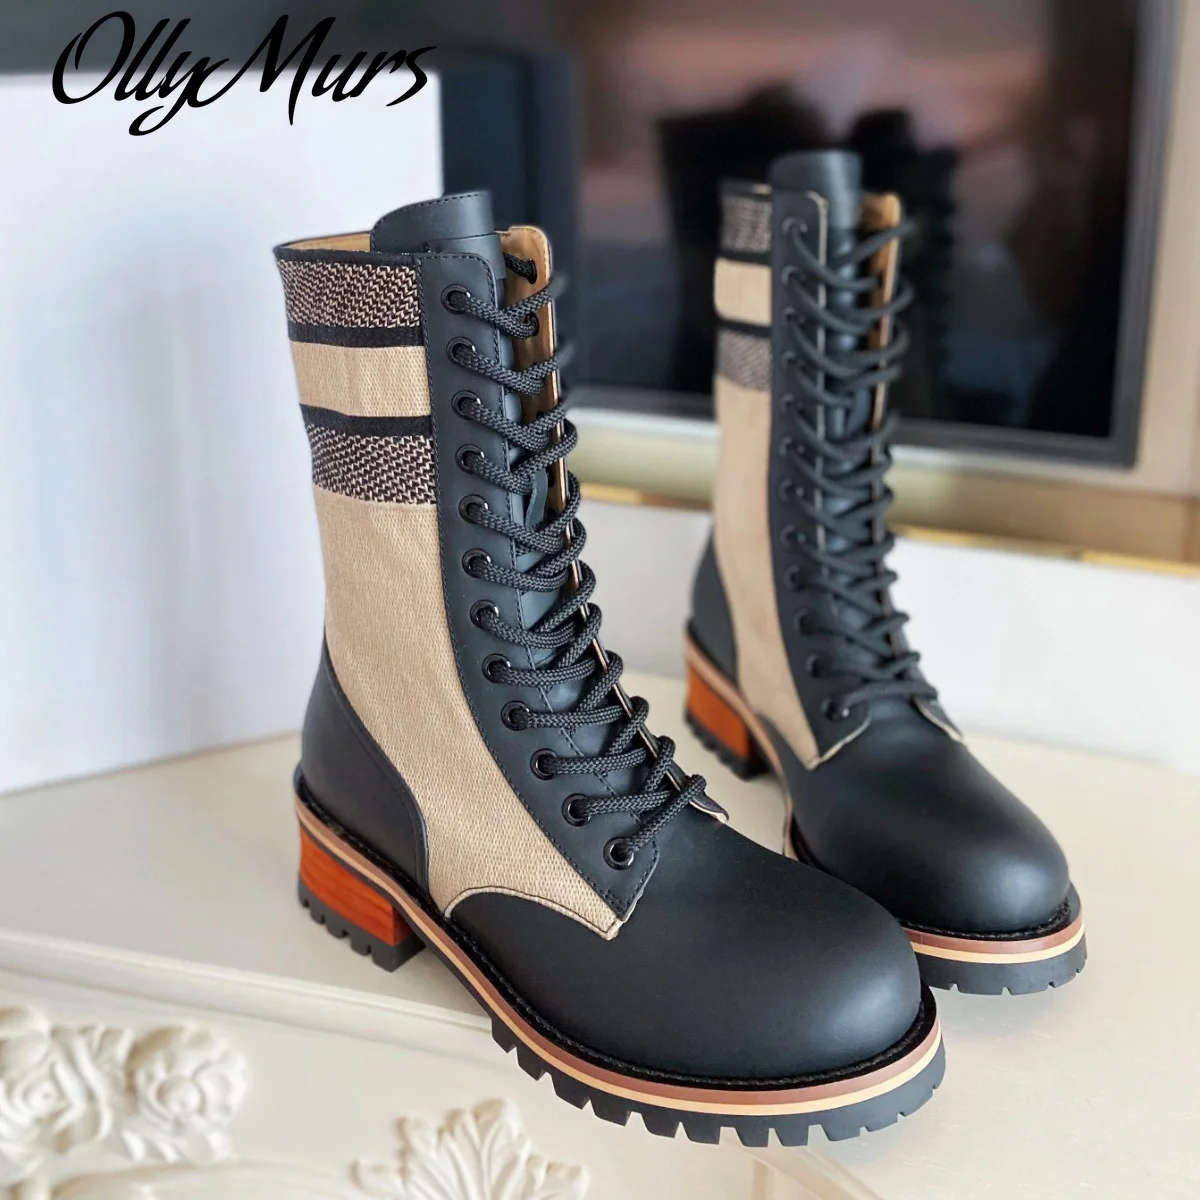 

Ollymurs Beige leather women's Motorcycle Boots Luxury Lace-Up low heel Round Toe mid-calf combat martin booties embossed shoes